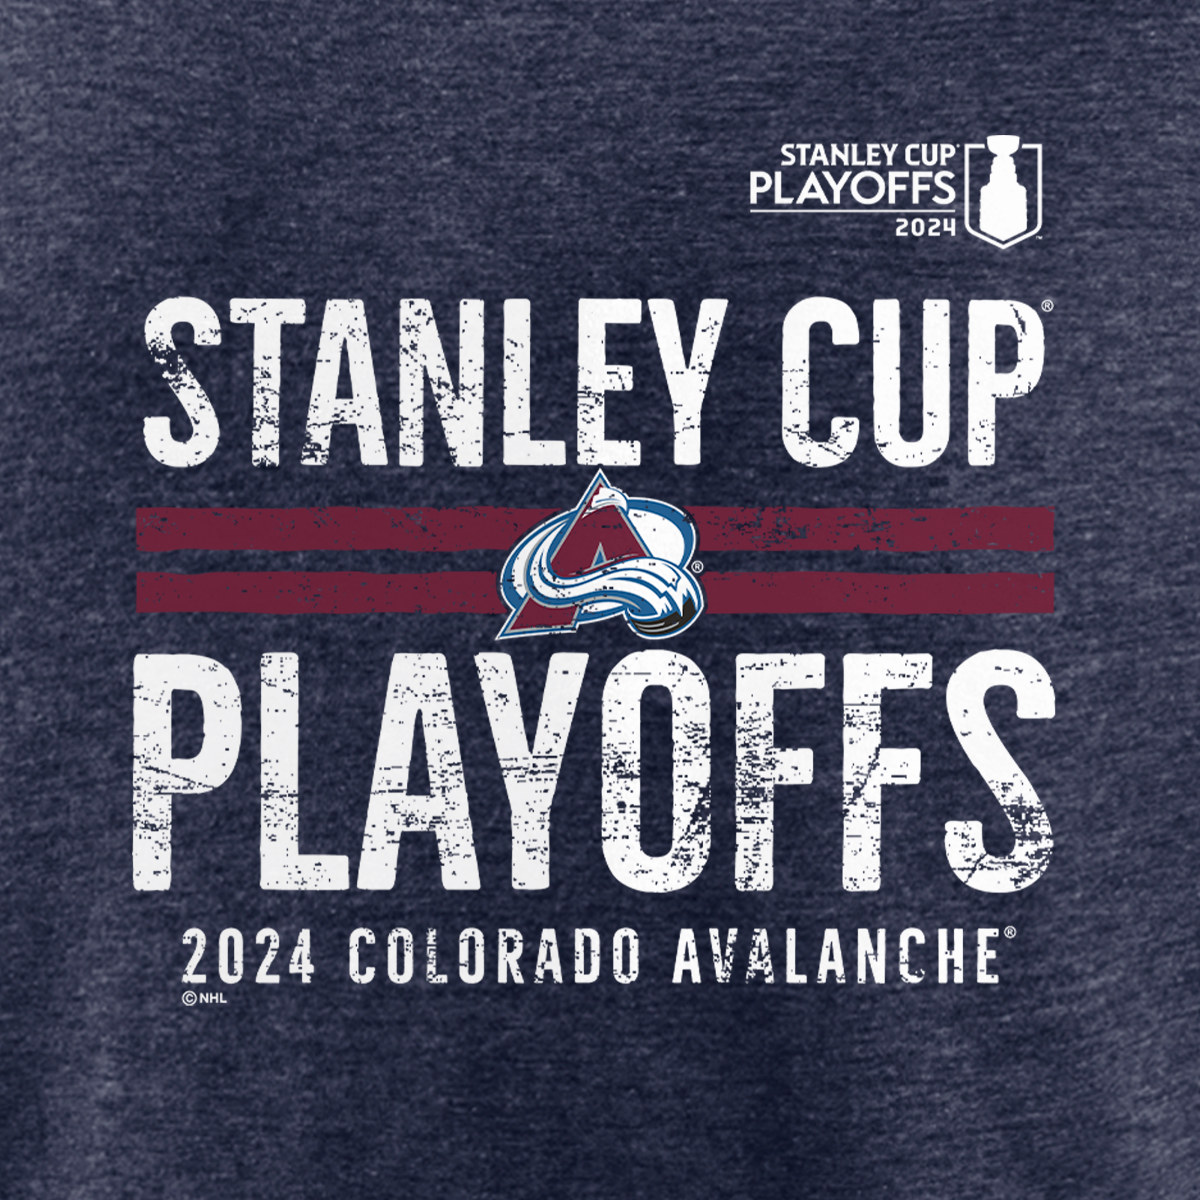 Print on tee says Stanley Cup Avs Logo Playoffs 2024 Colorado Avalanche